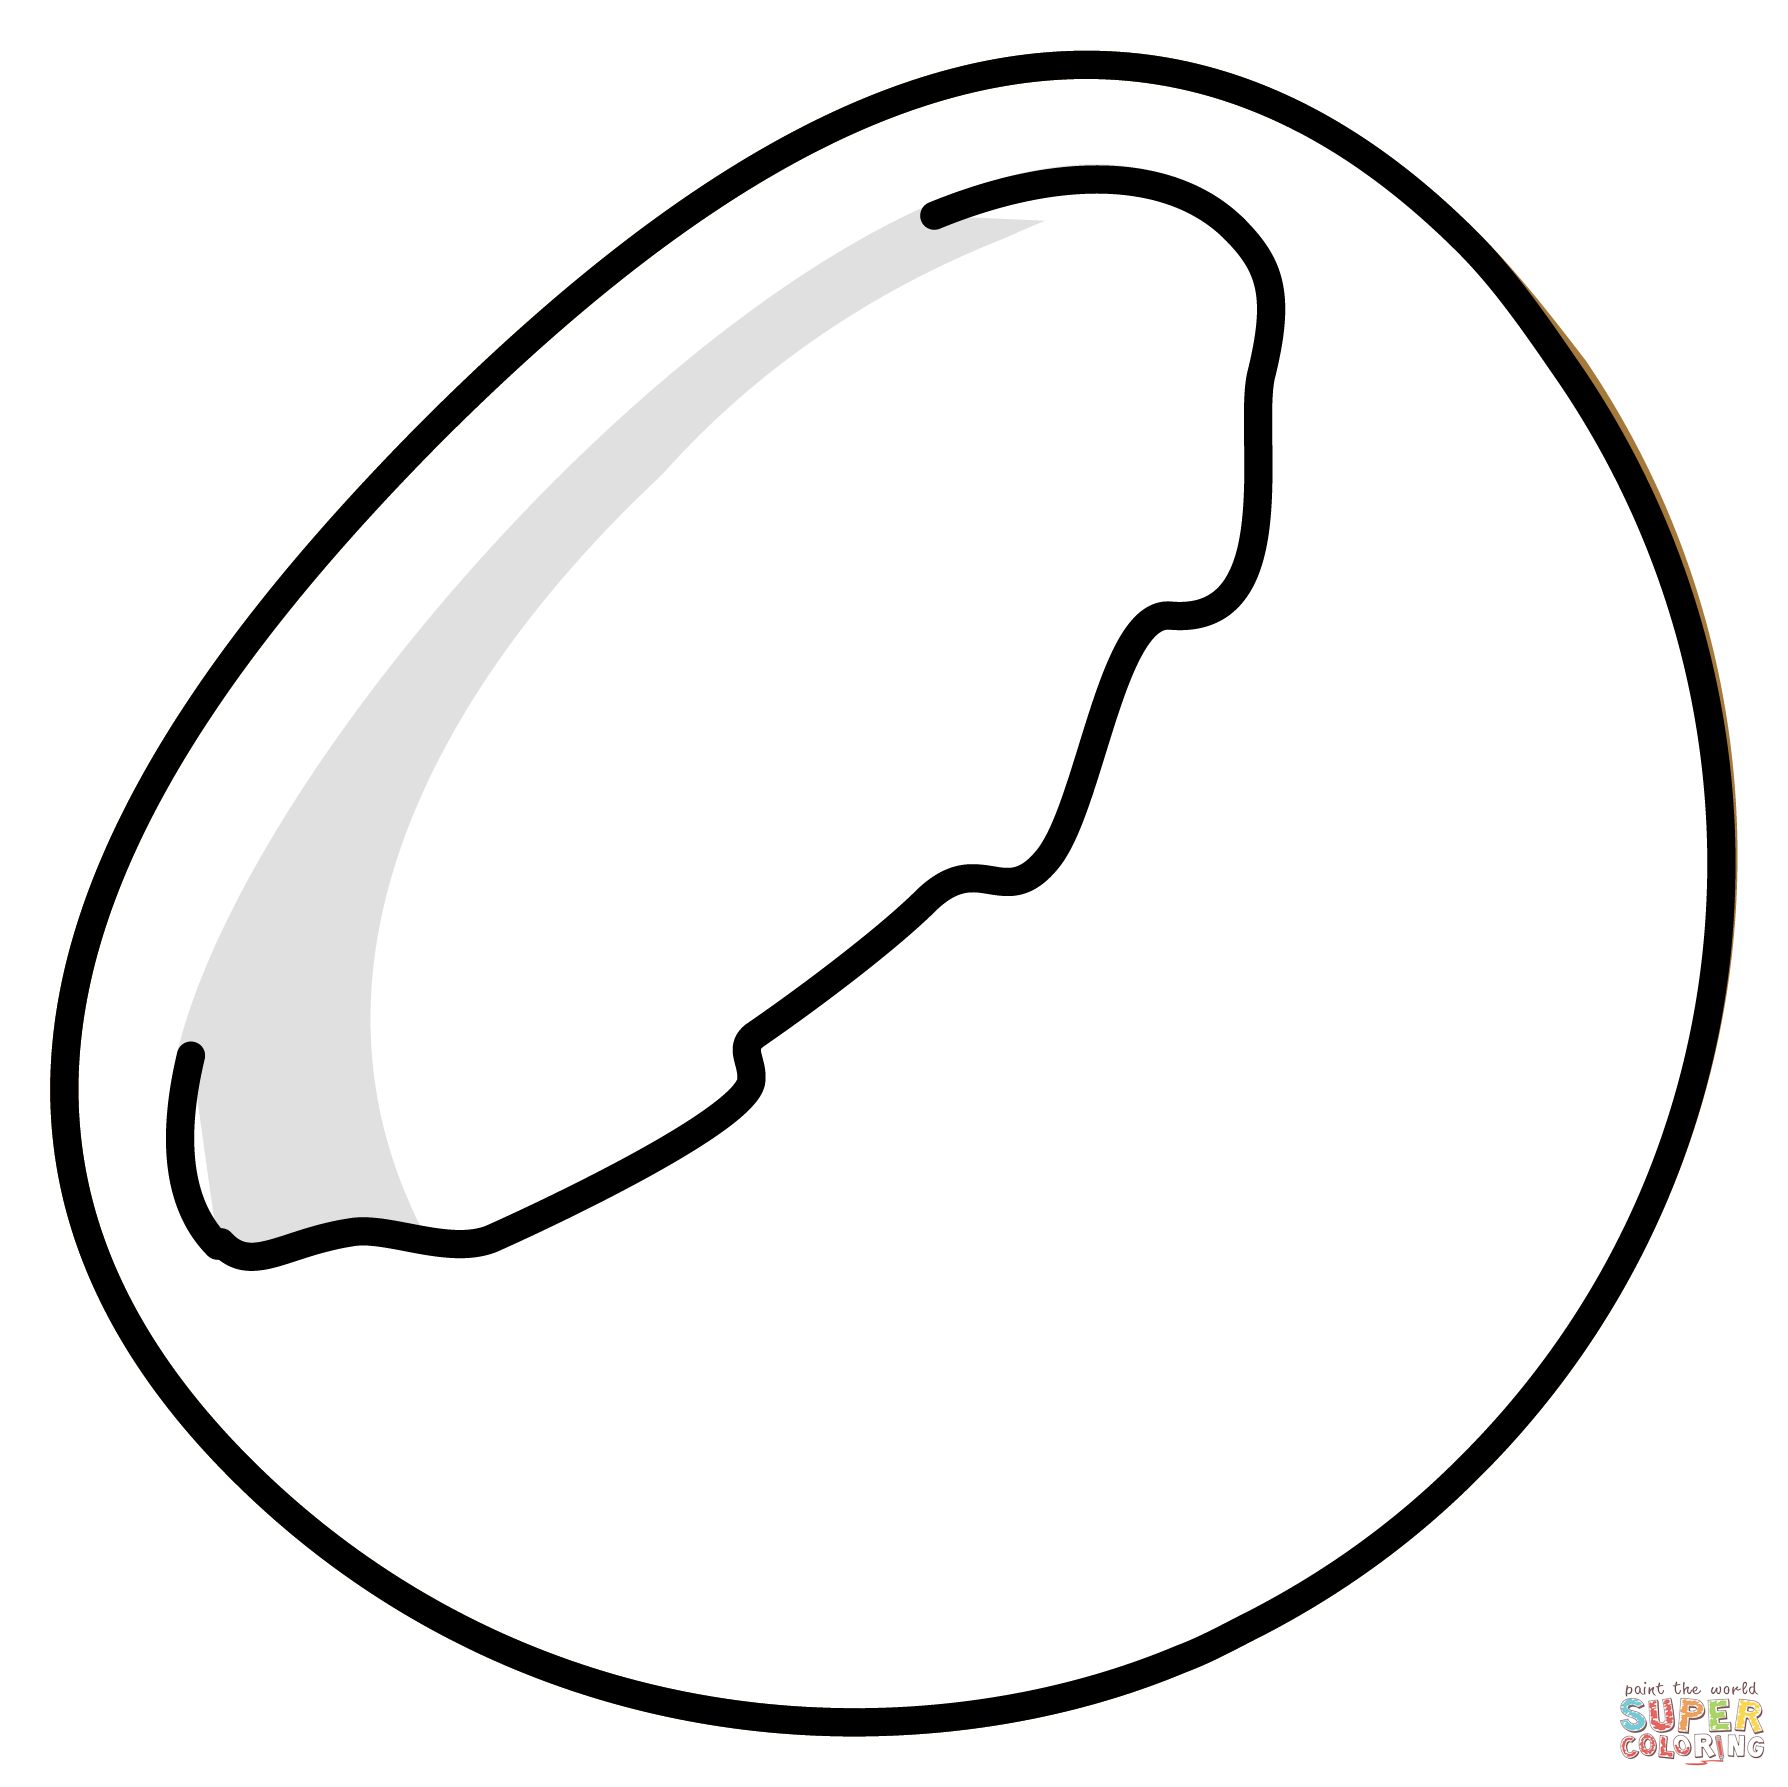 Coconut emoji coloring page free printable coloring pages